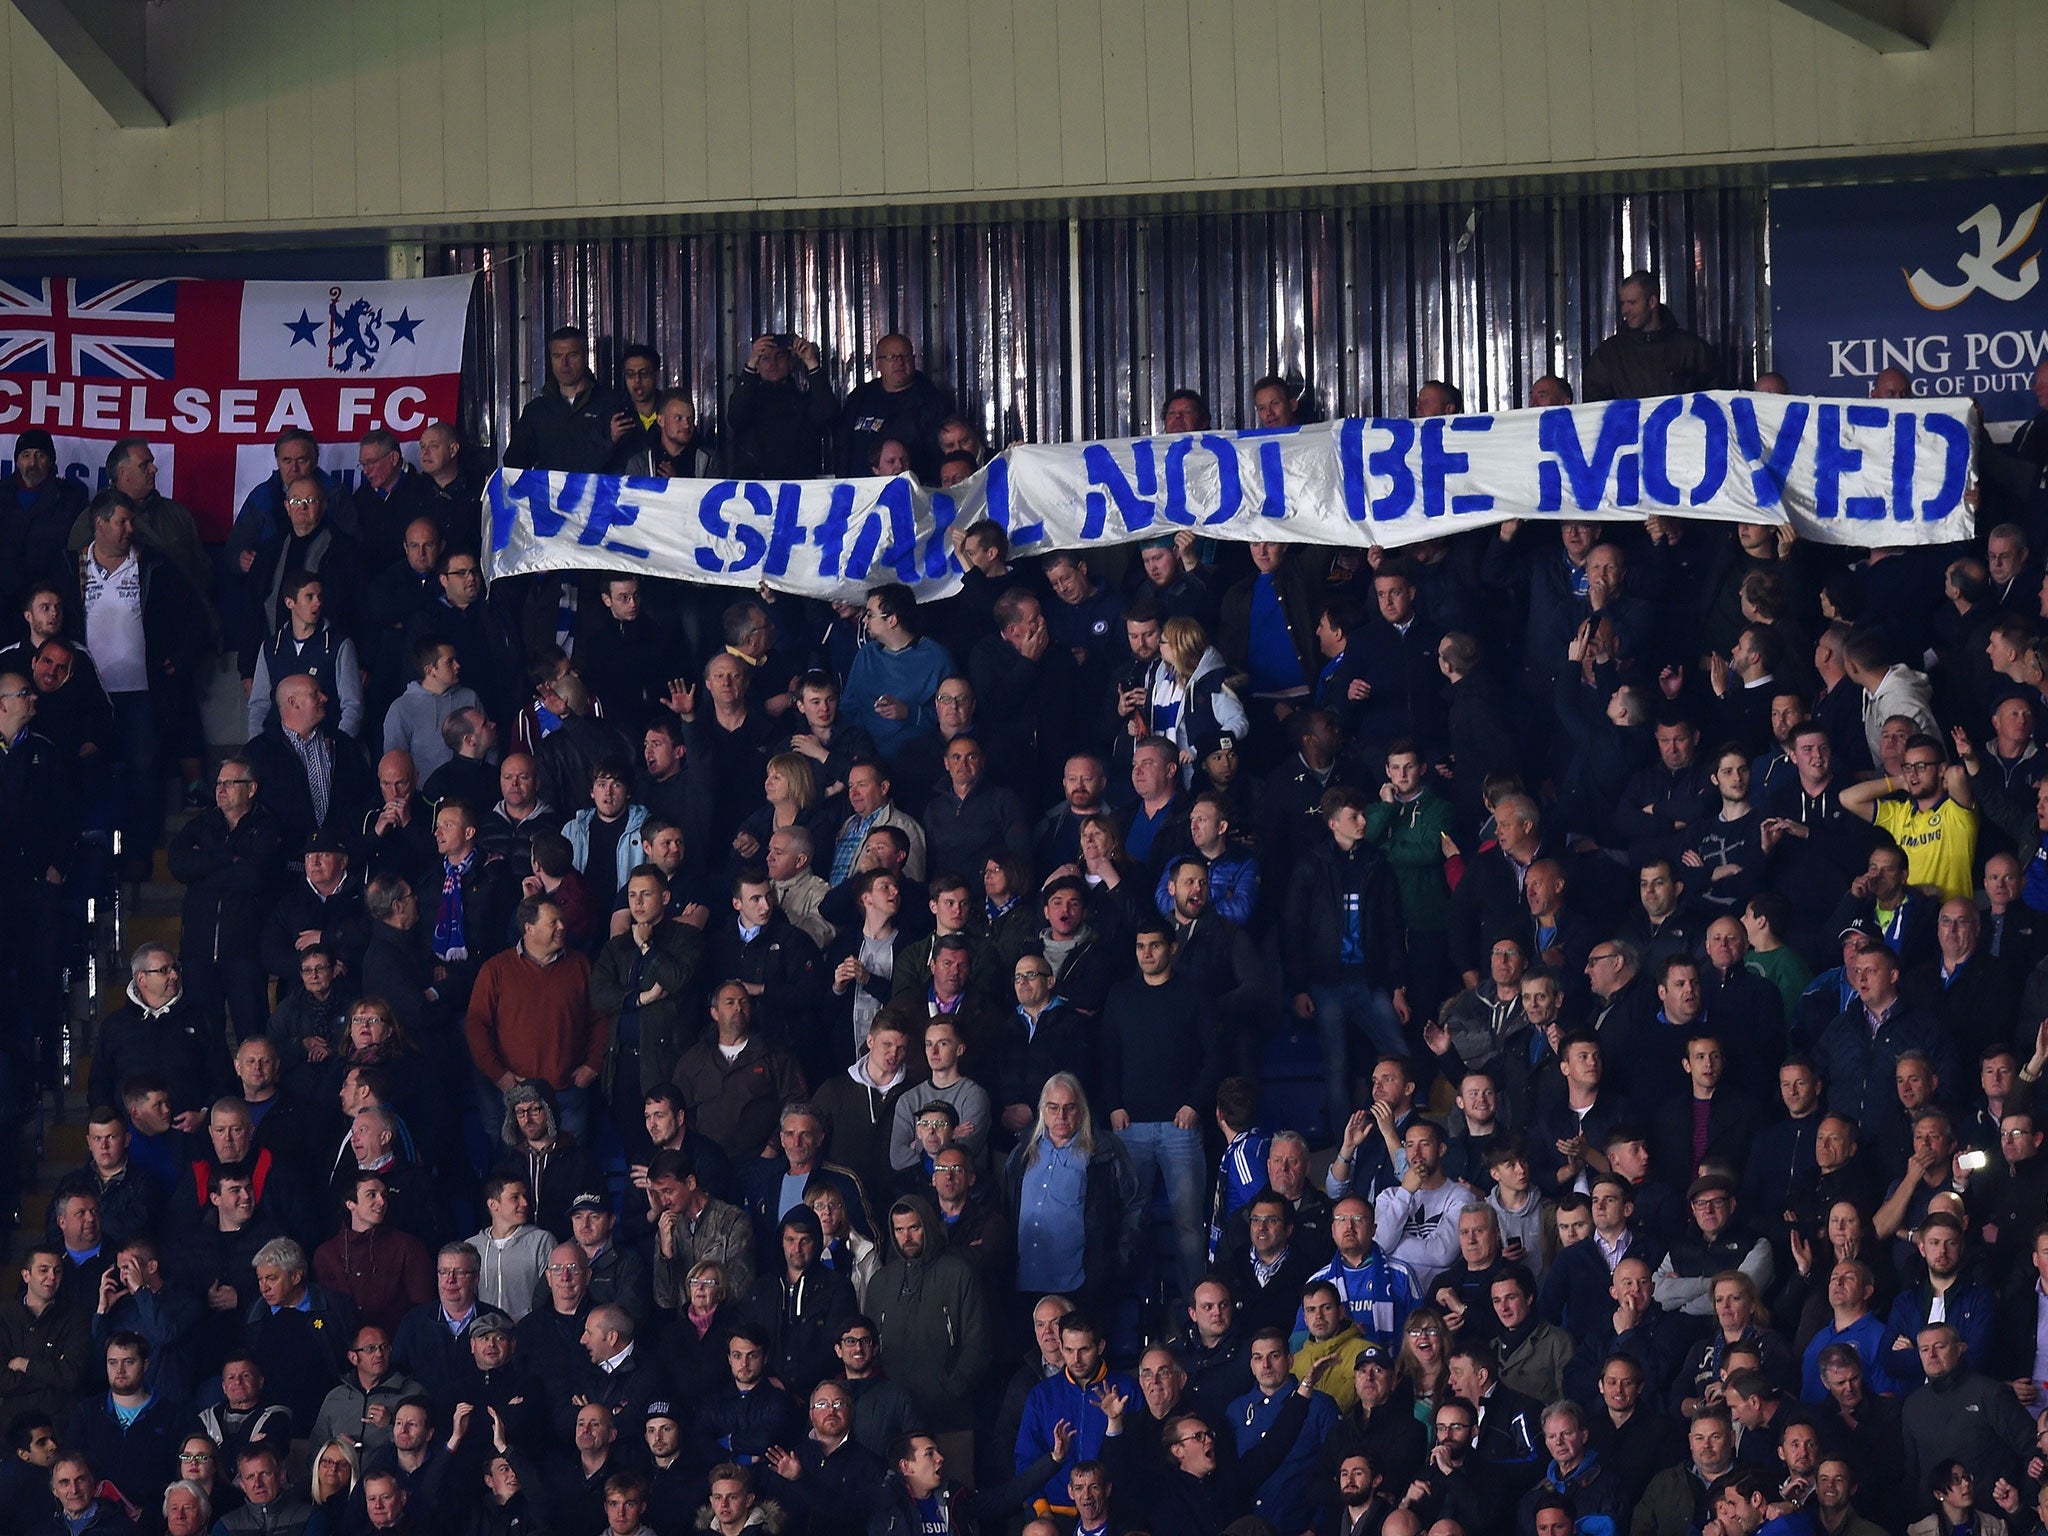 Chelsea fans at the King Power Stadium during the win over Leicester